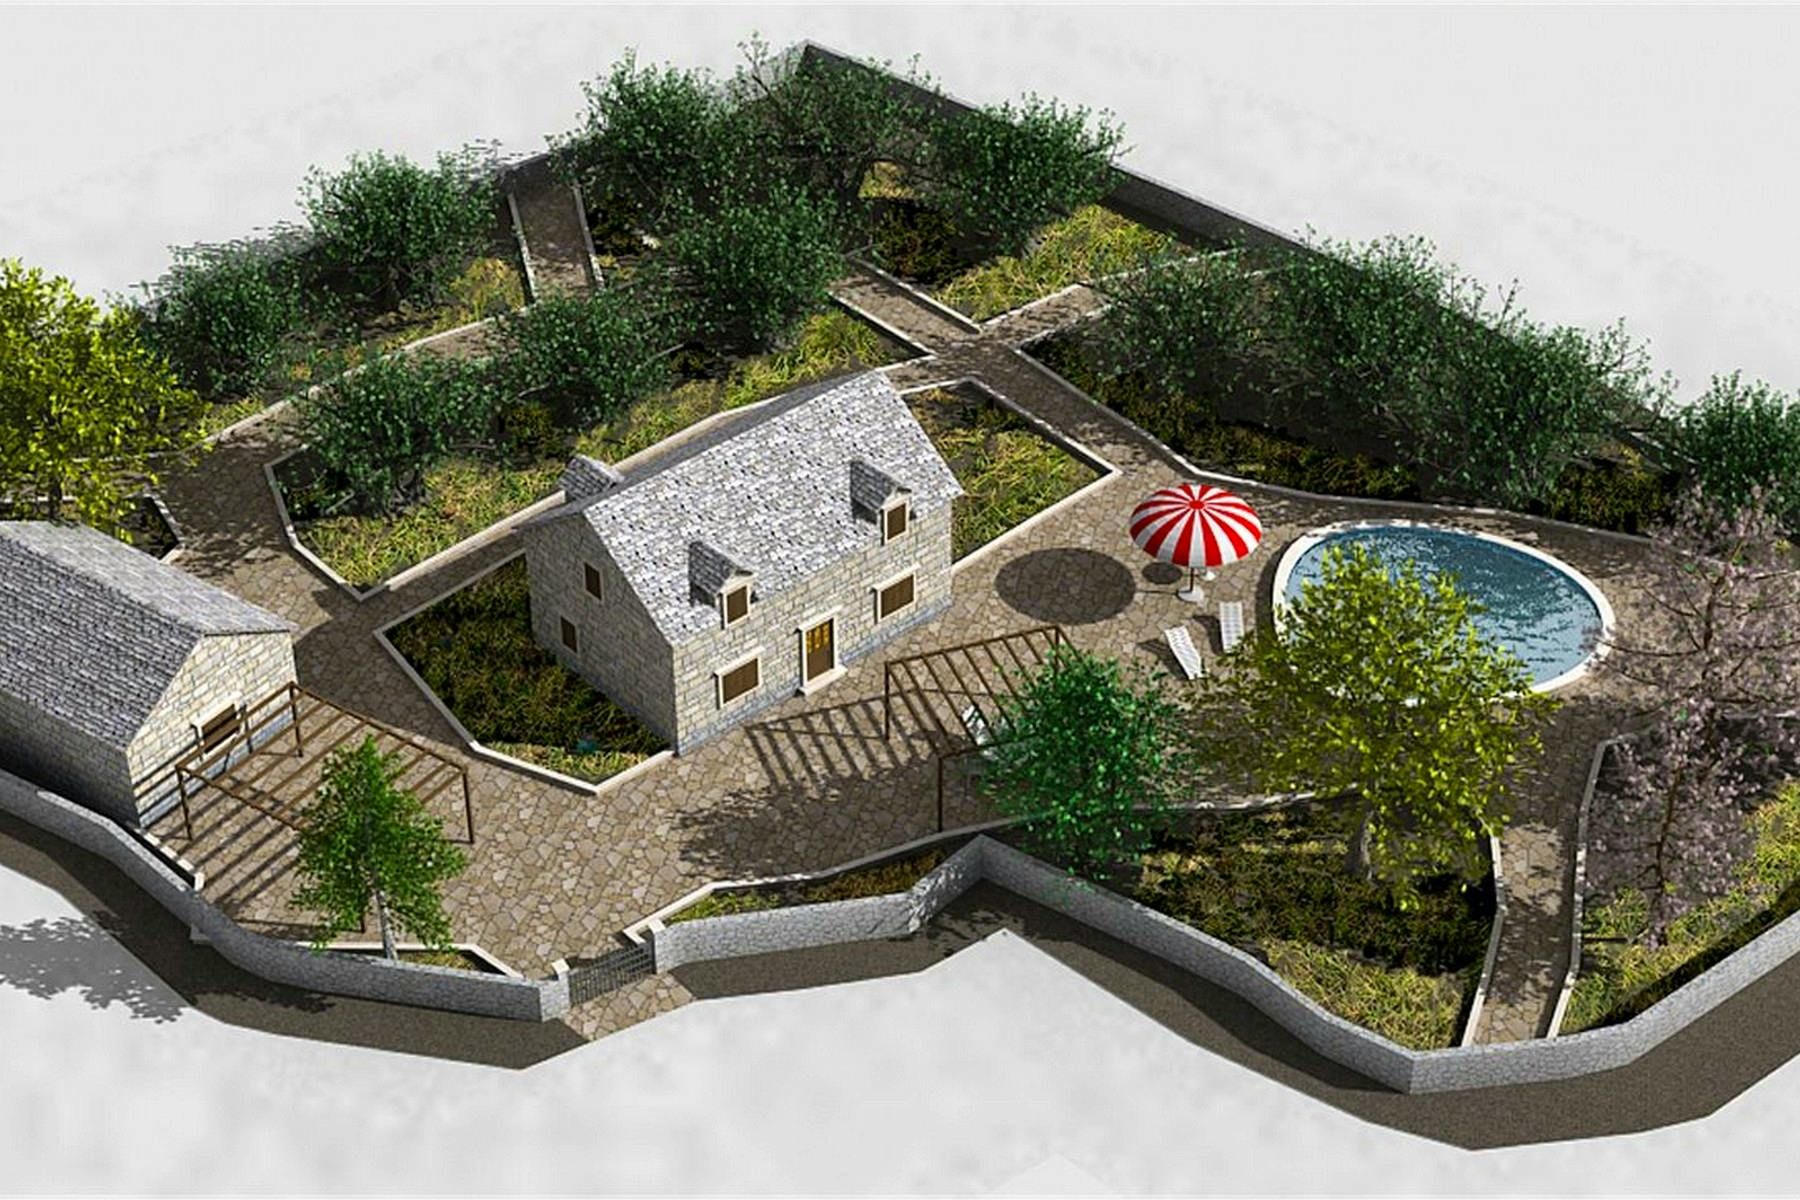 3D project for a self sustaining estate 